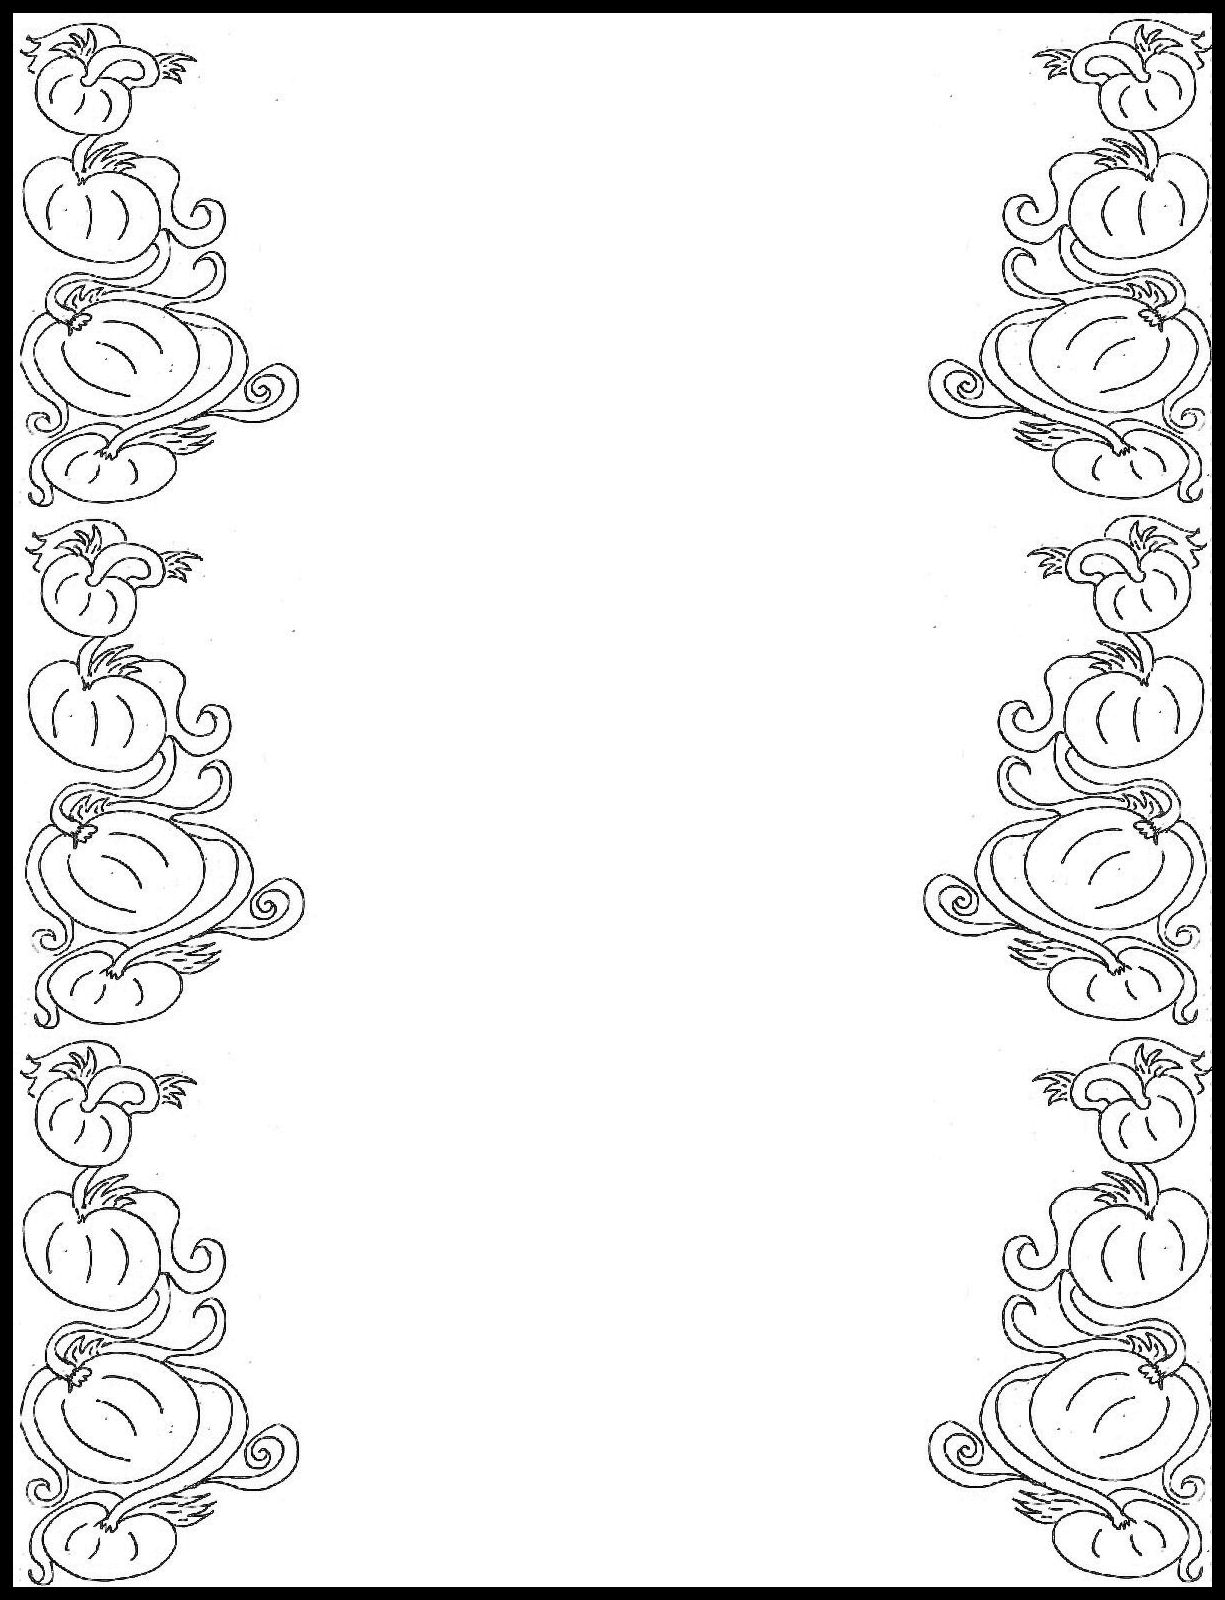 free-free-printable-border-designs-for-paper-black-and-white-download